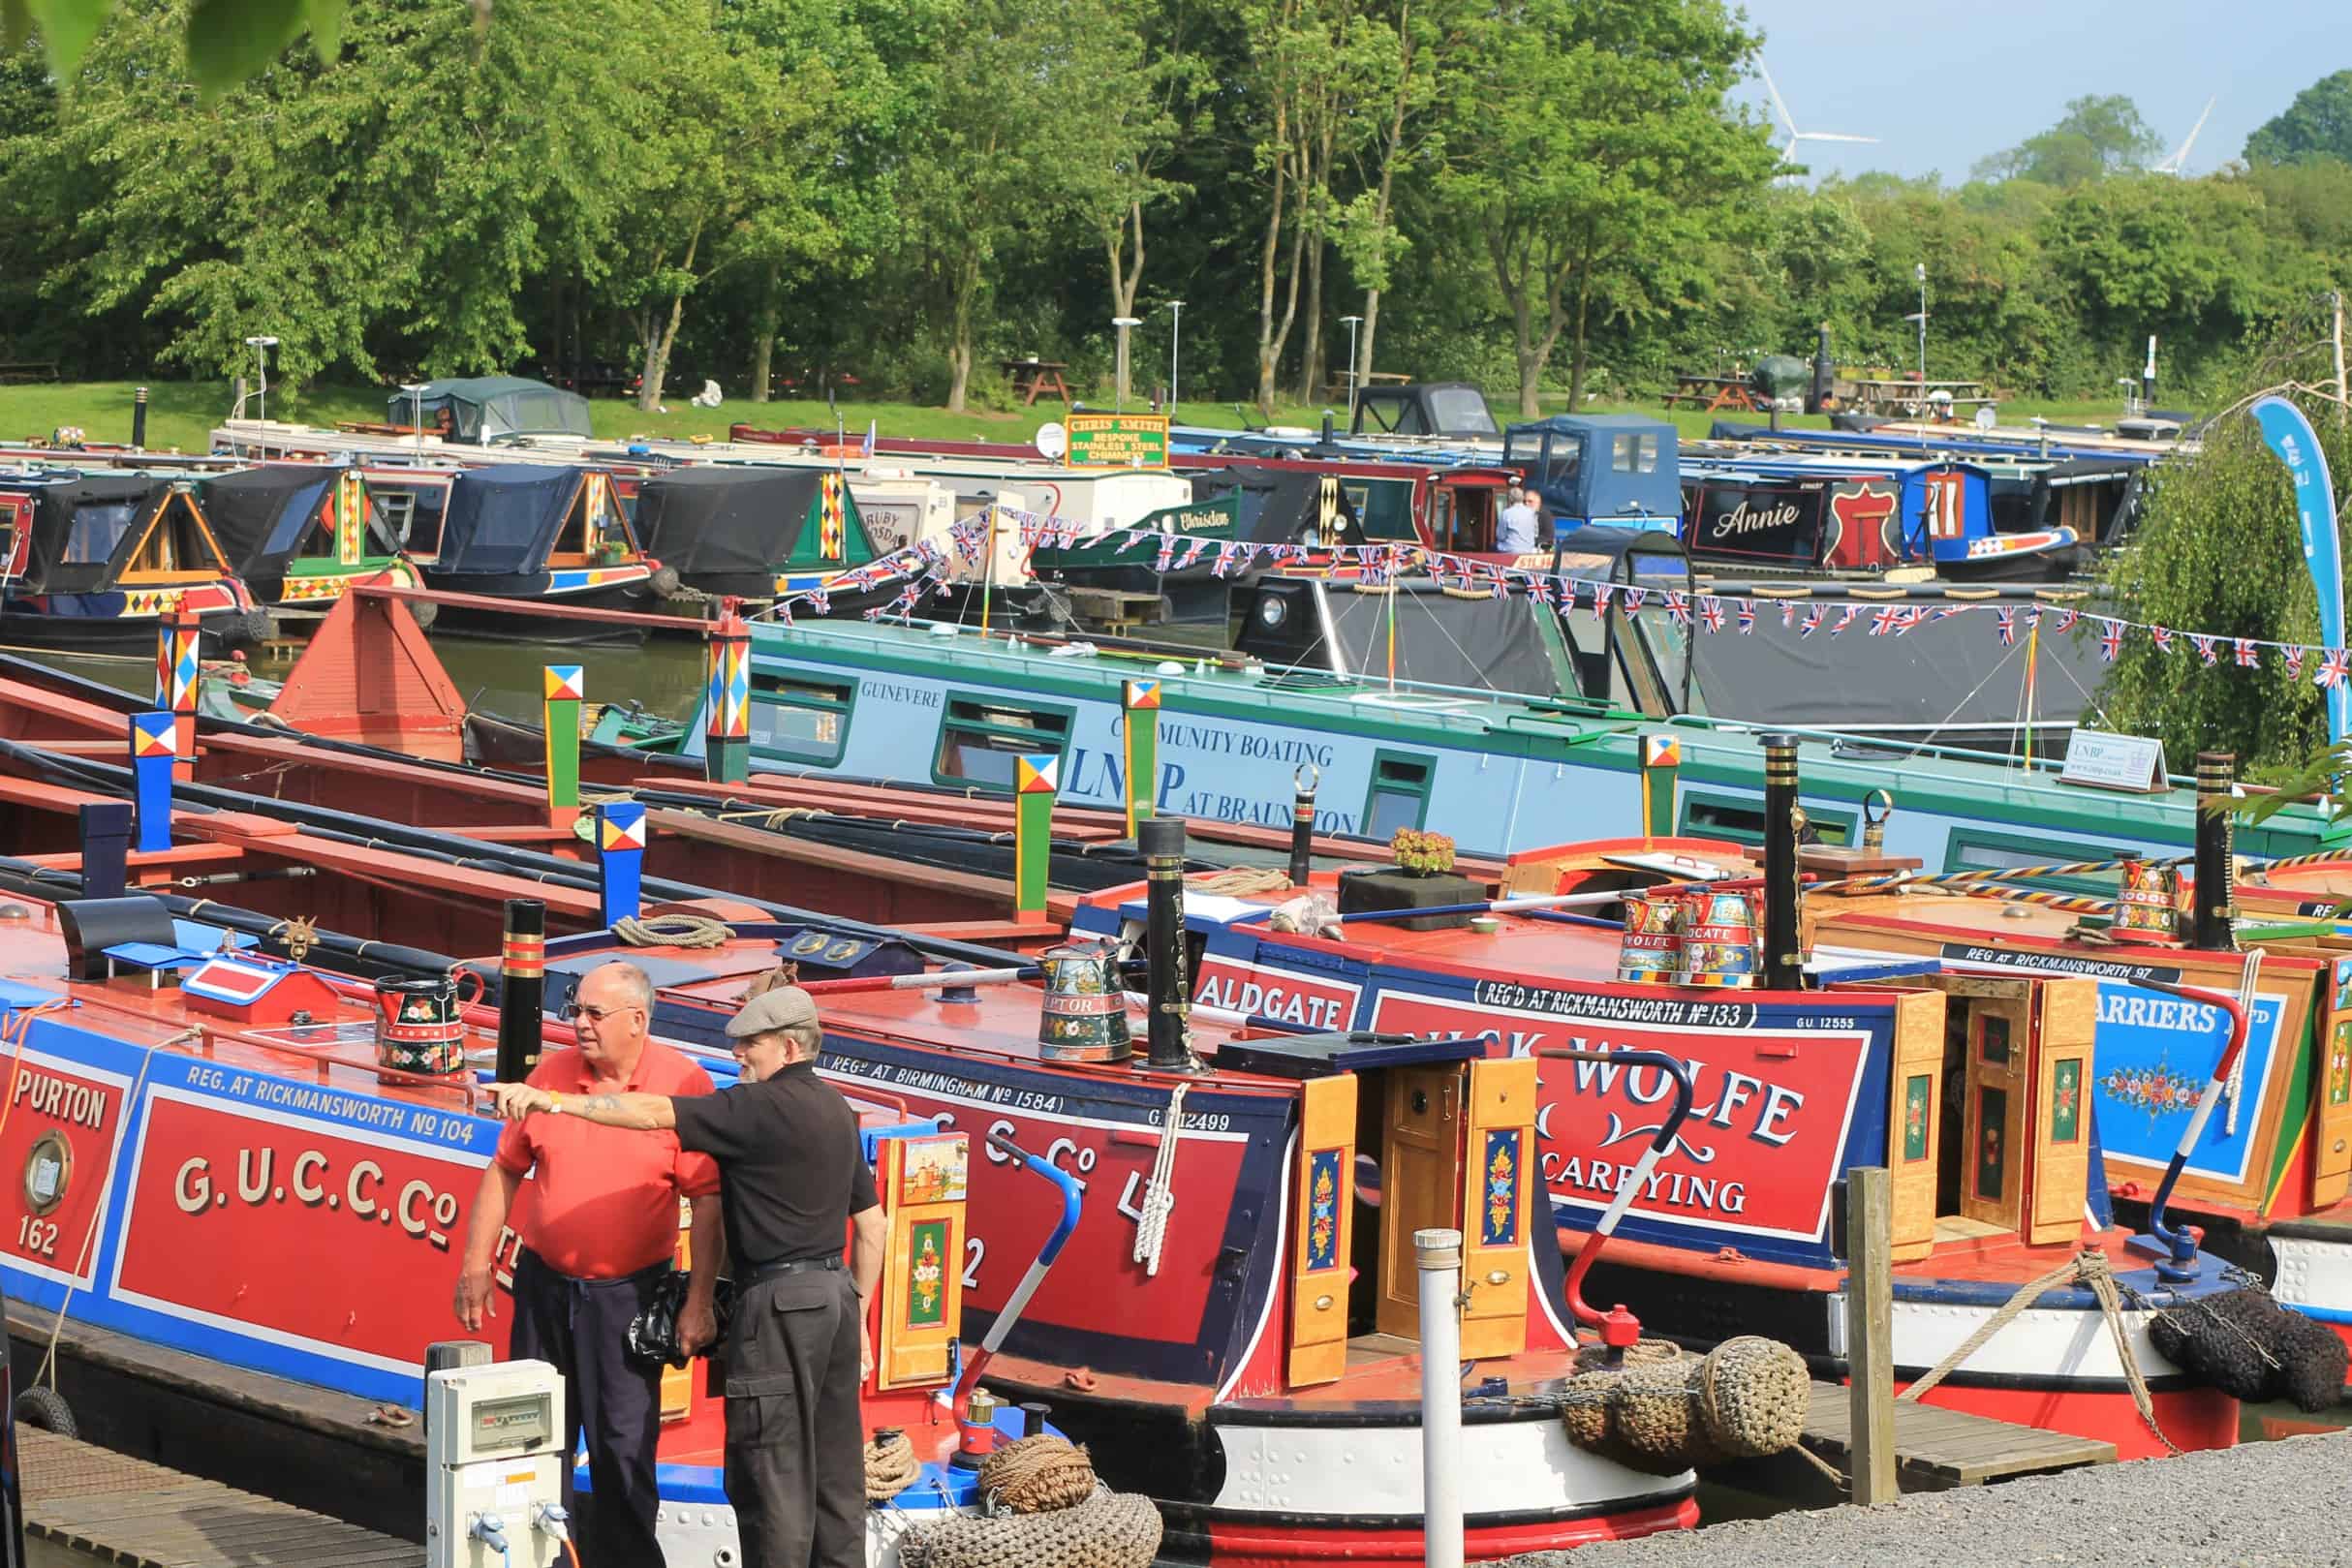 Best canal boat holiday festivals